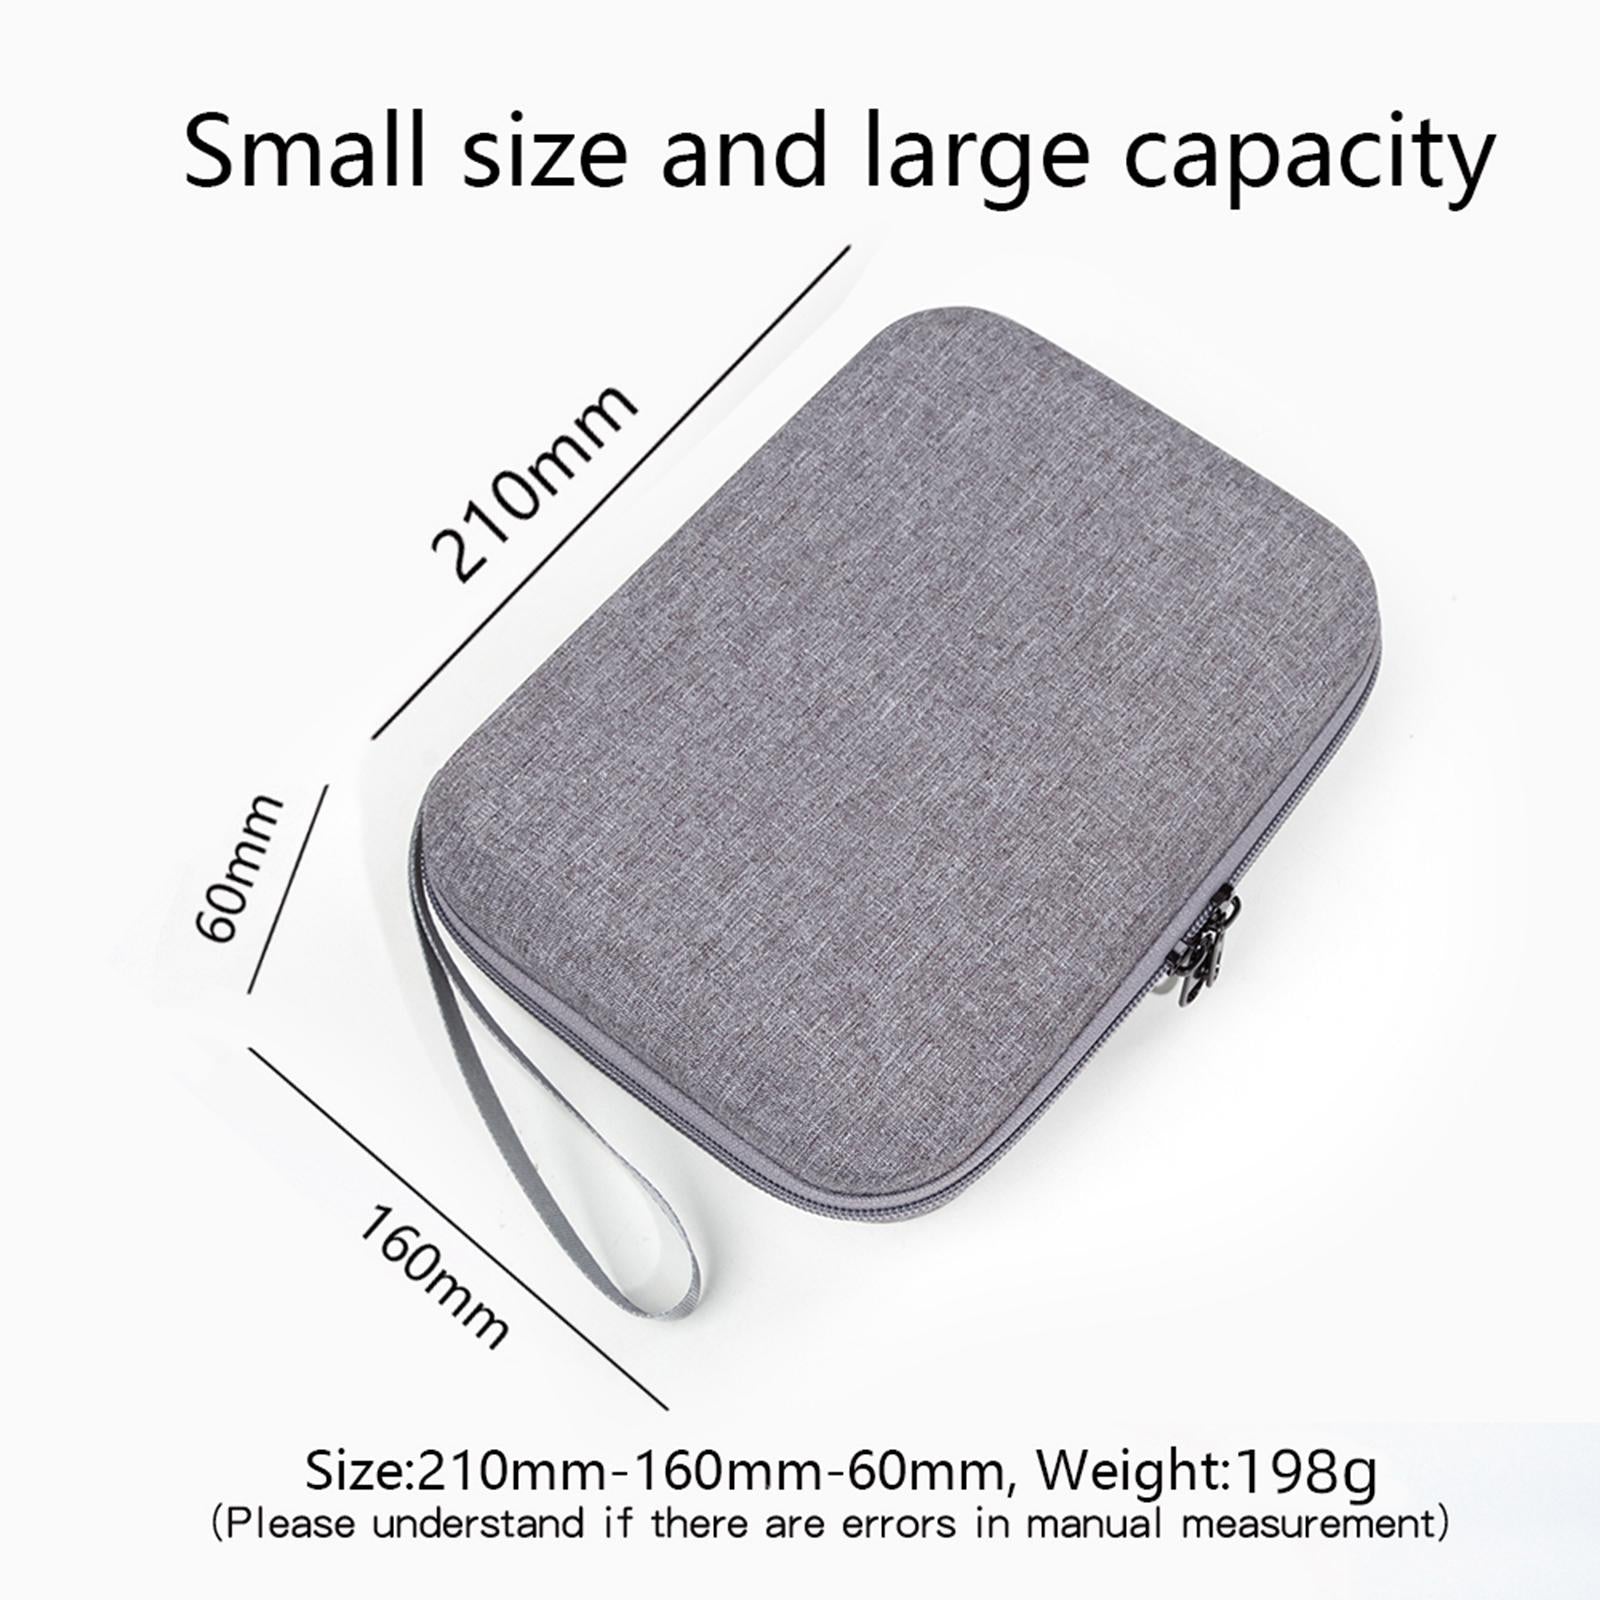 Stabilizer Case Pouch Hard EVA Shell Bag for Flow Stabilizer Handheld Gimbal Grey